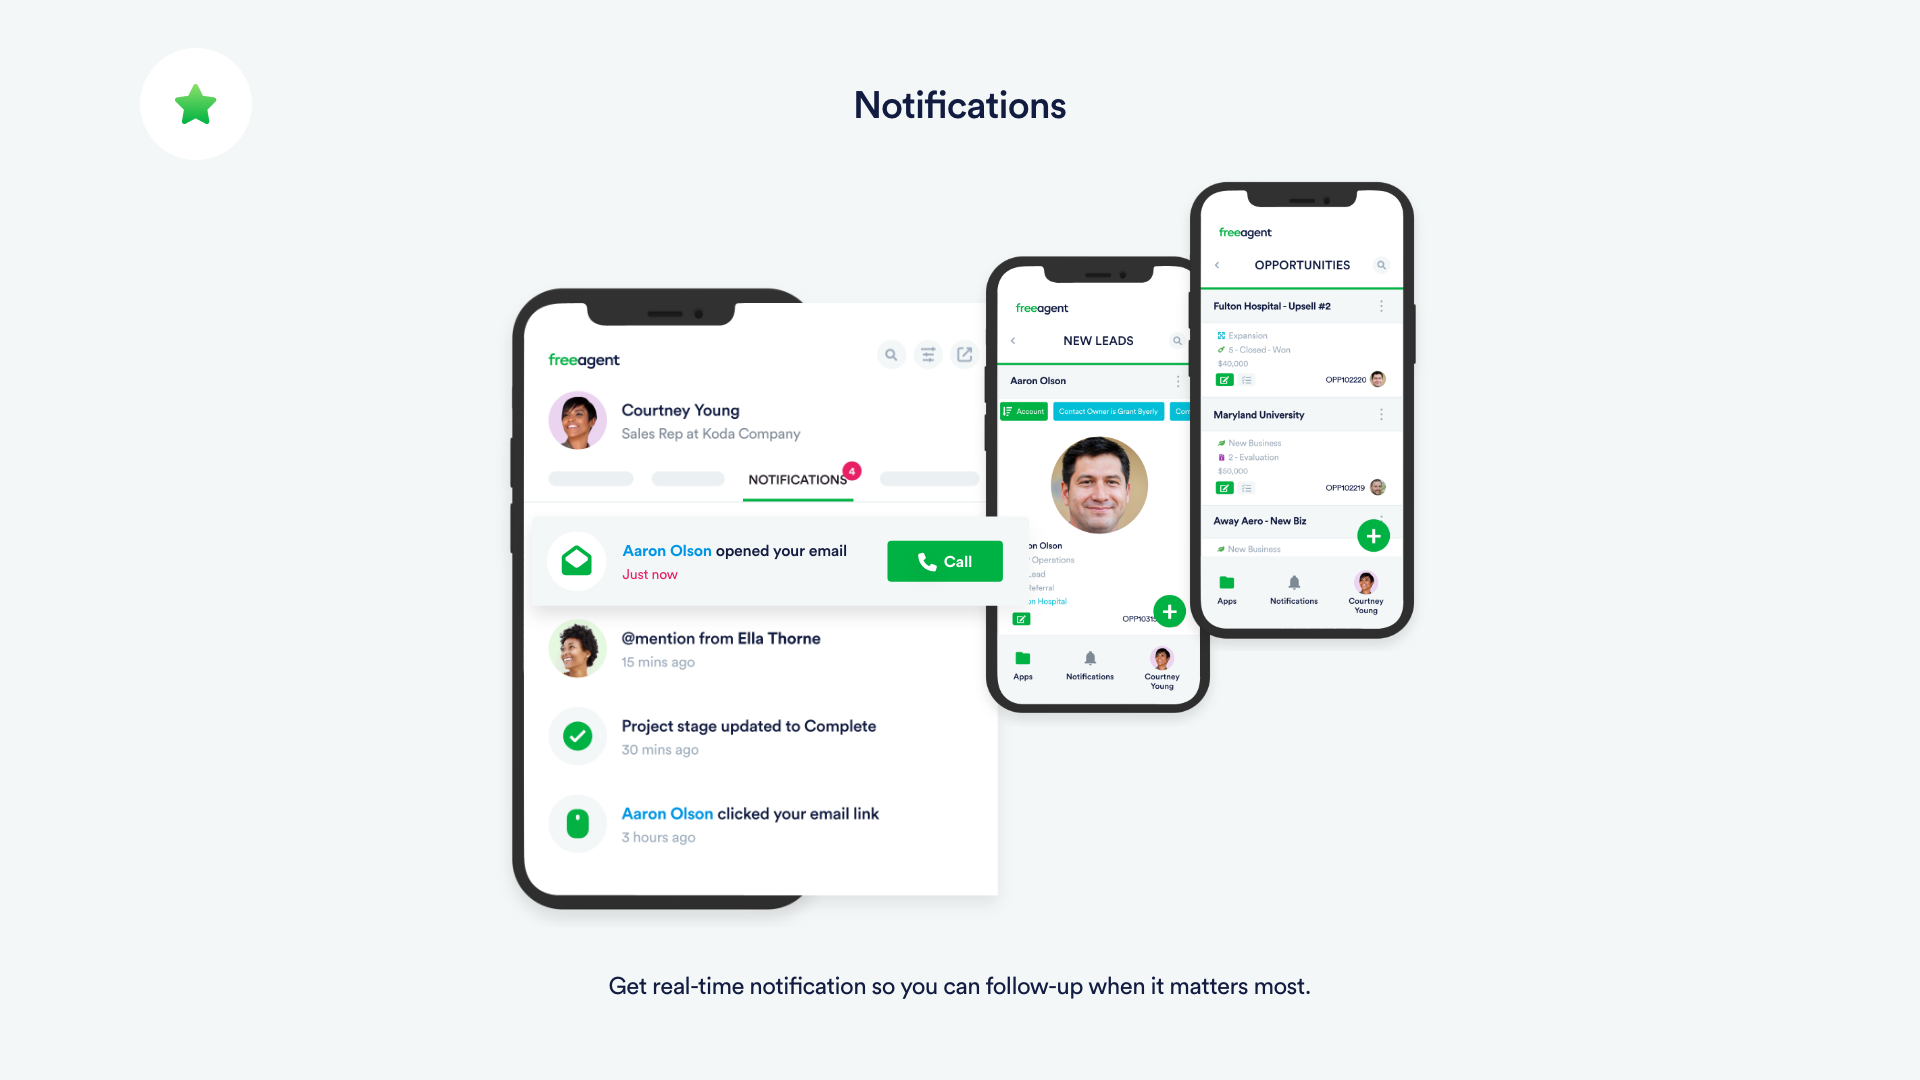 Get real-time notifications so you can follow-up when it matters most.